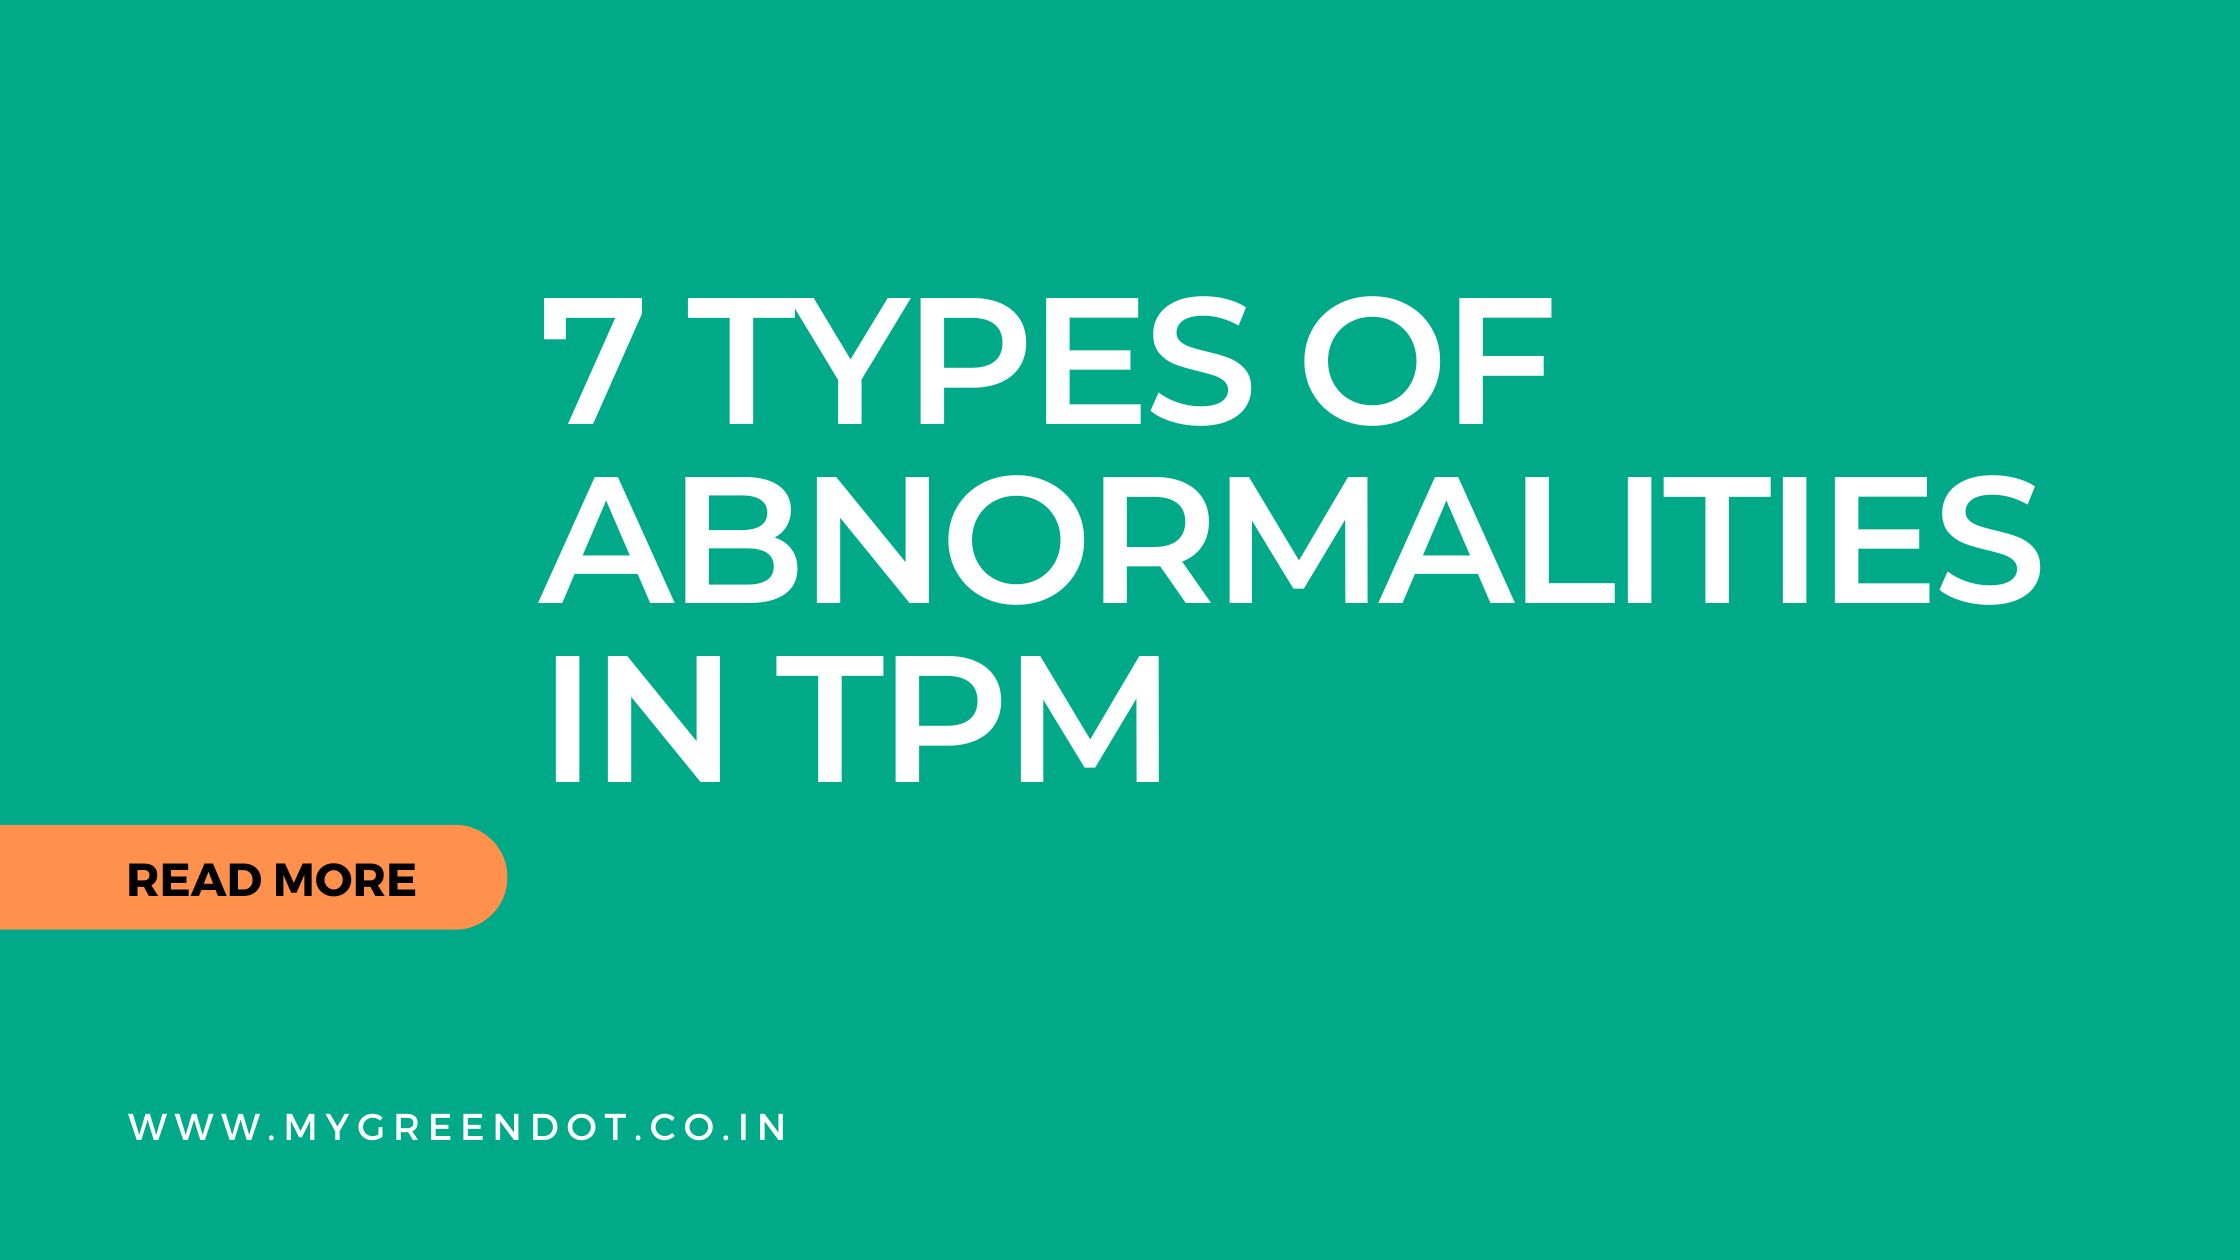 7 types of abnormalities in tpm